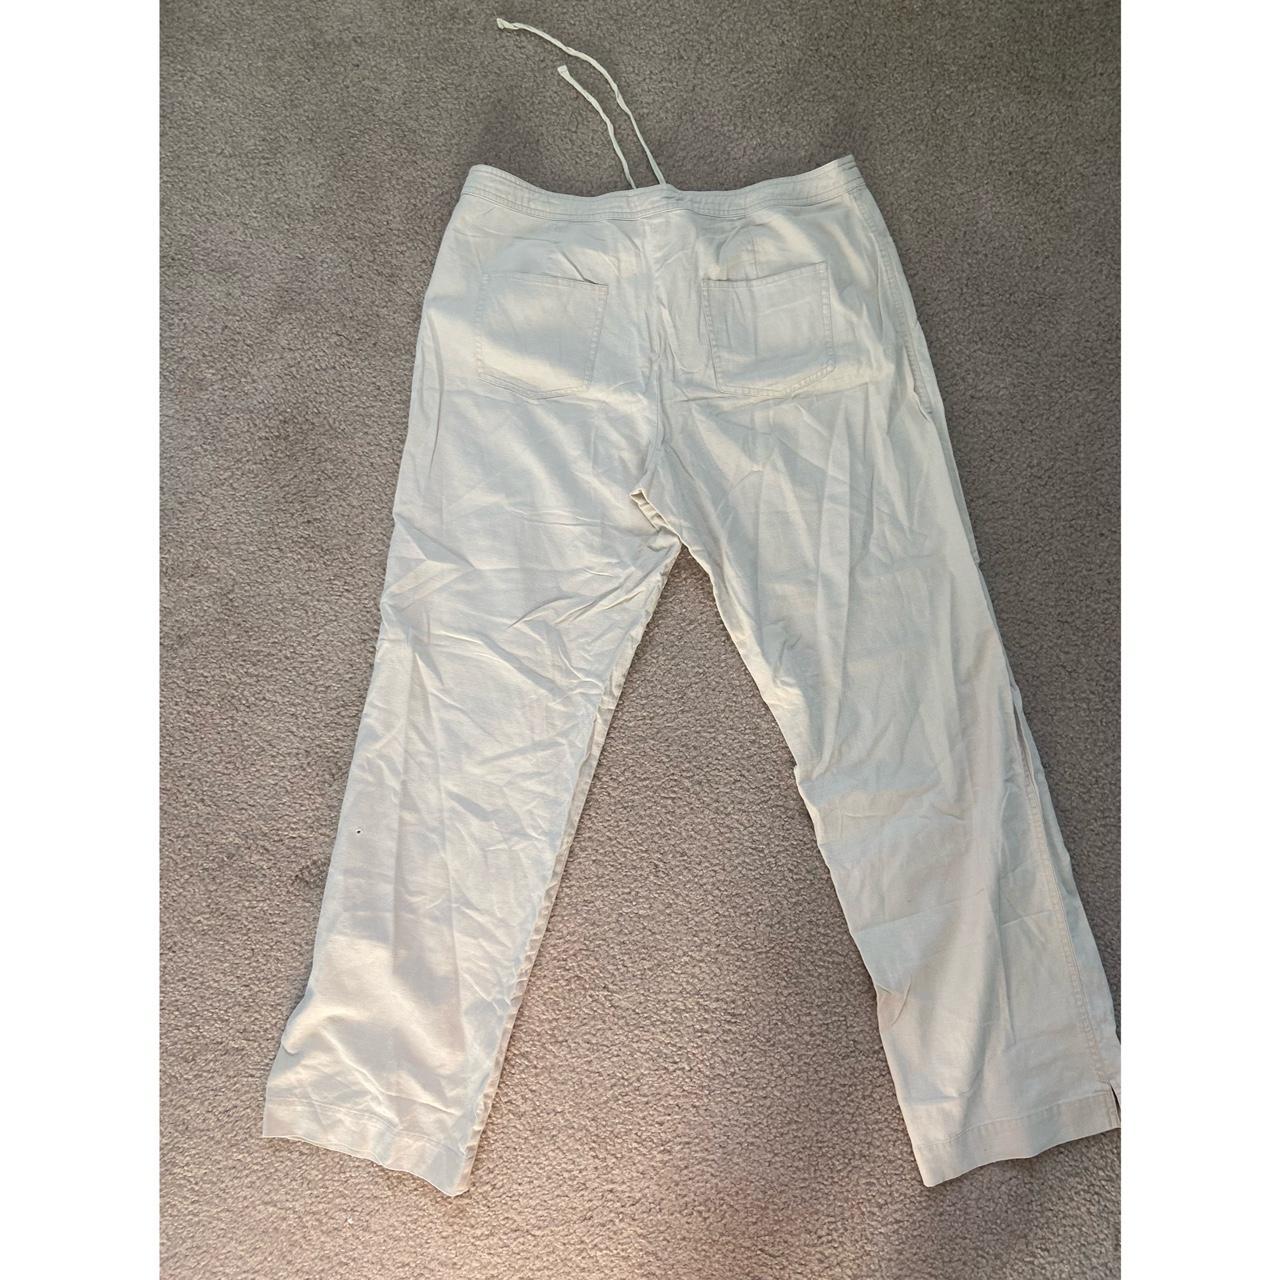 BASIC EDITIONS linen pants, Size 14, In great